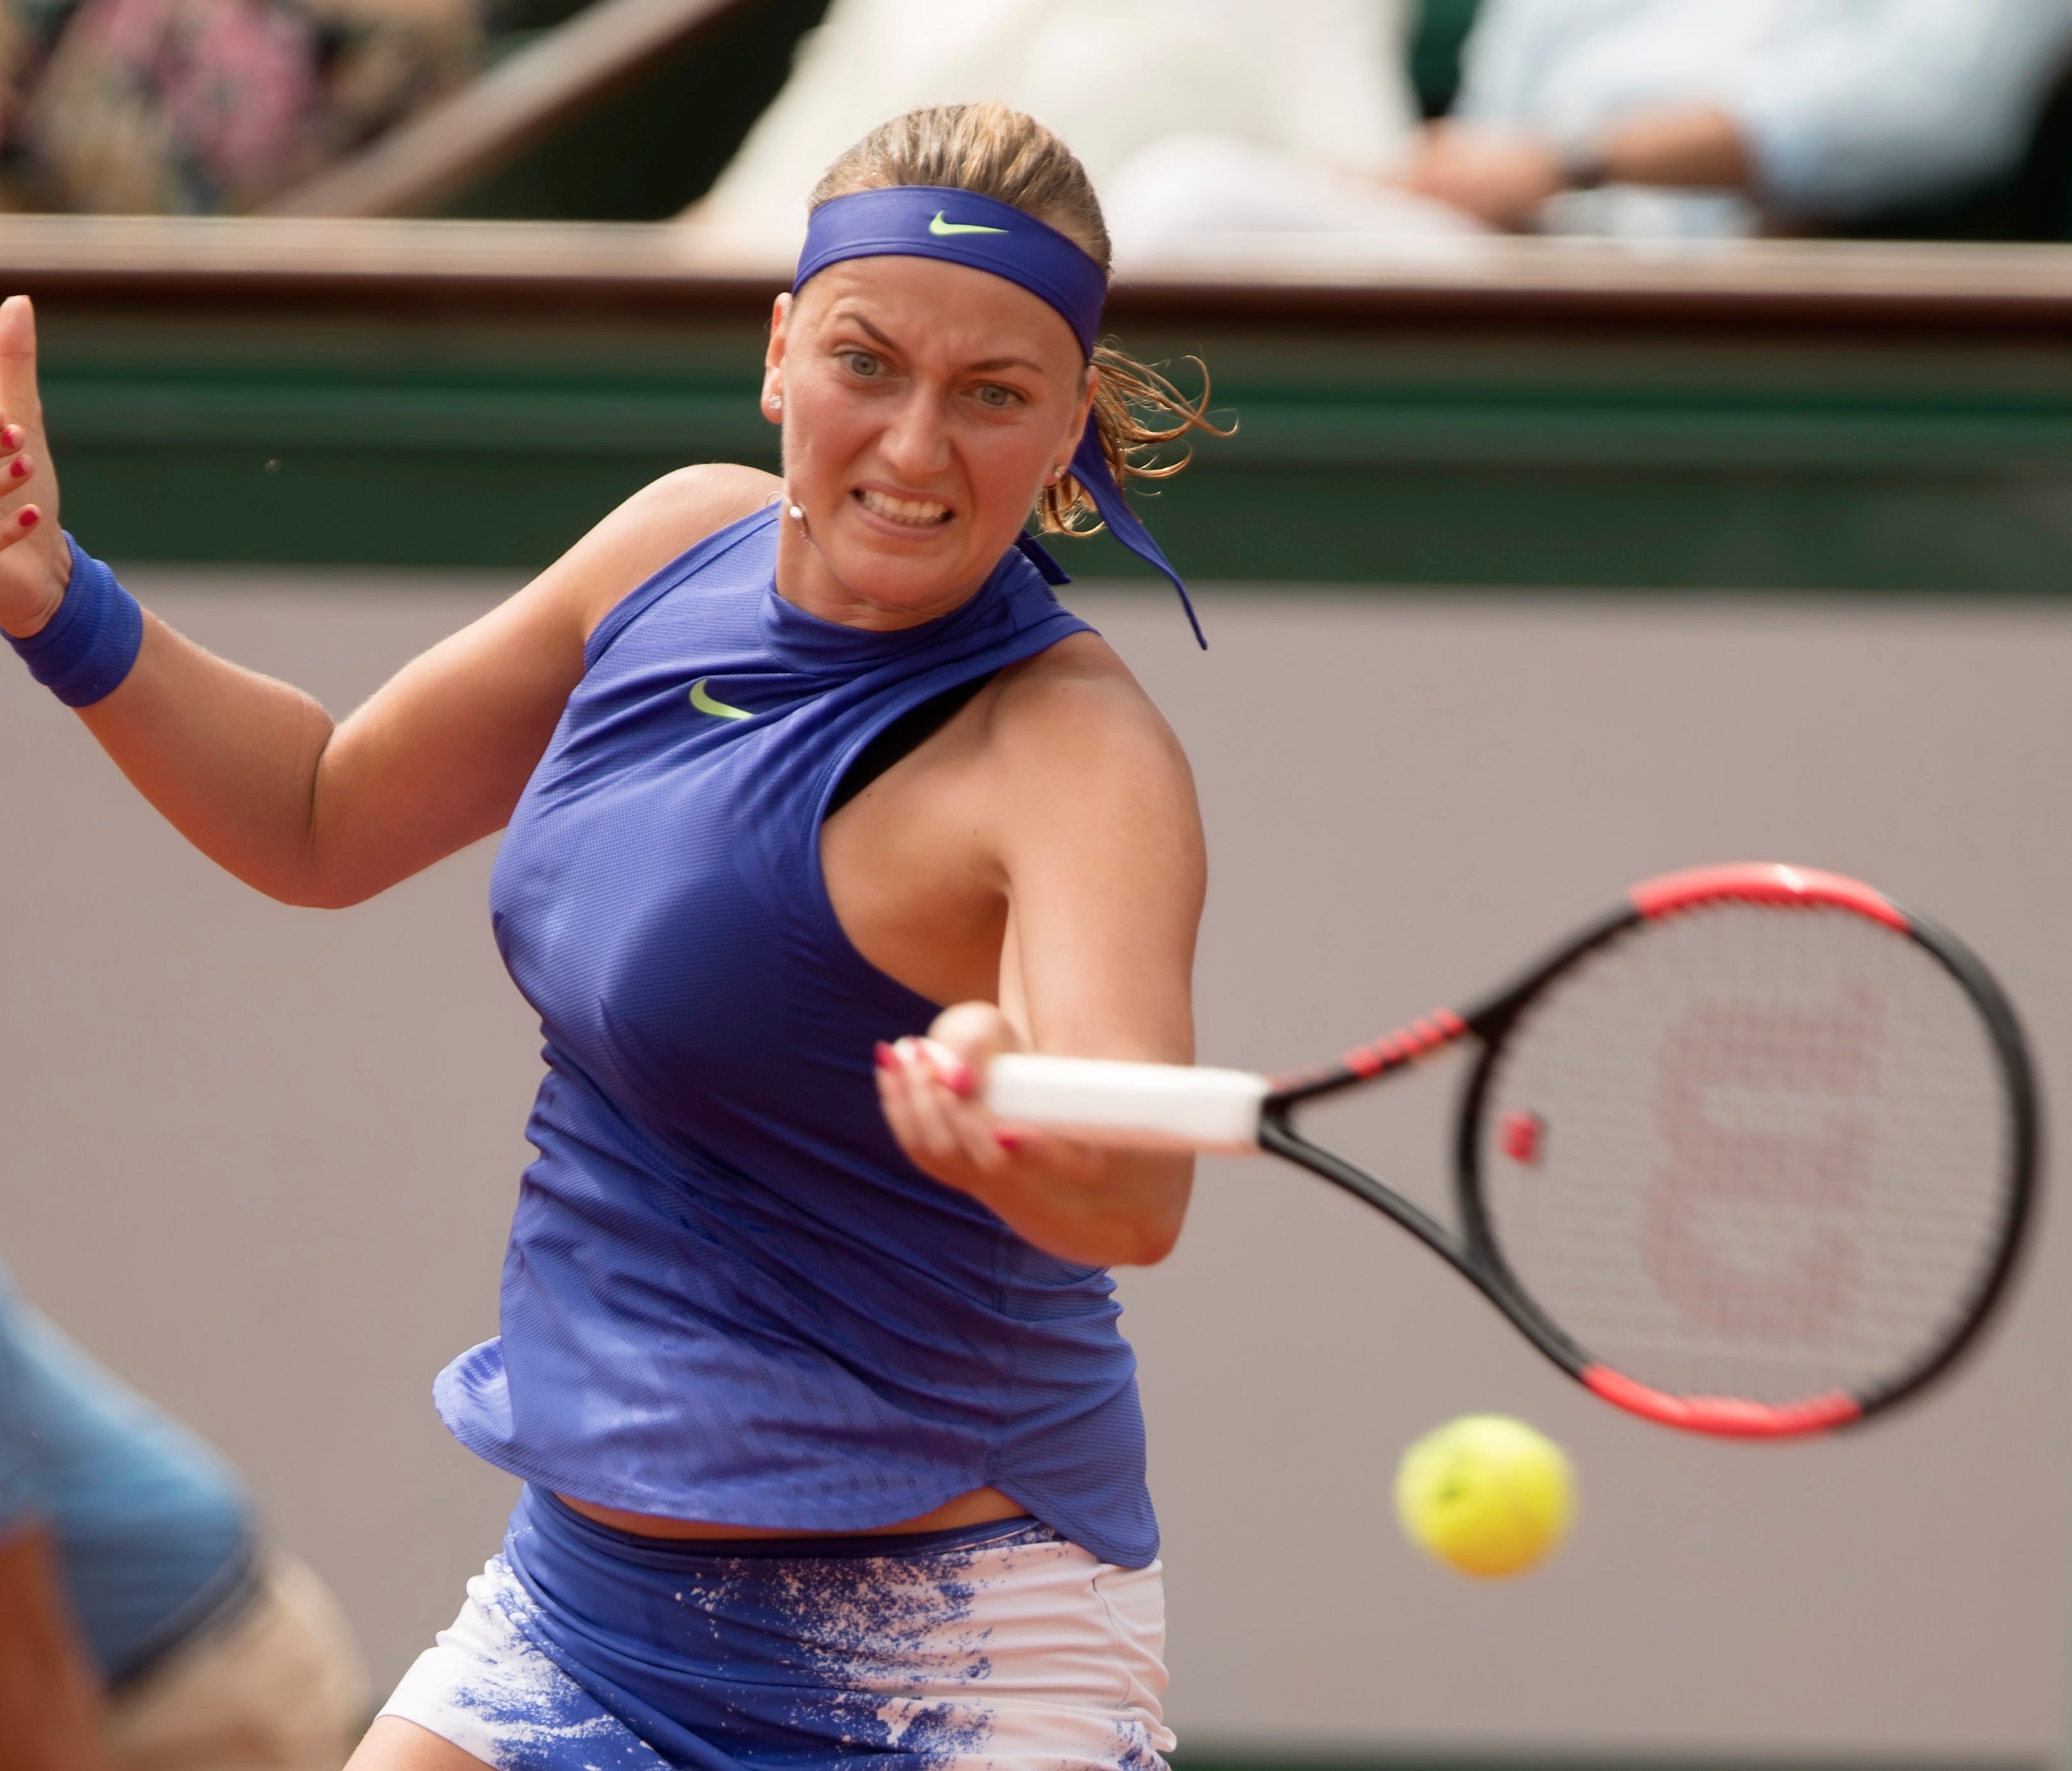 Petra Kvitova in action during her match against Julia Boserup on Day 1 of the 2017 French Open.